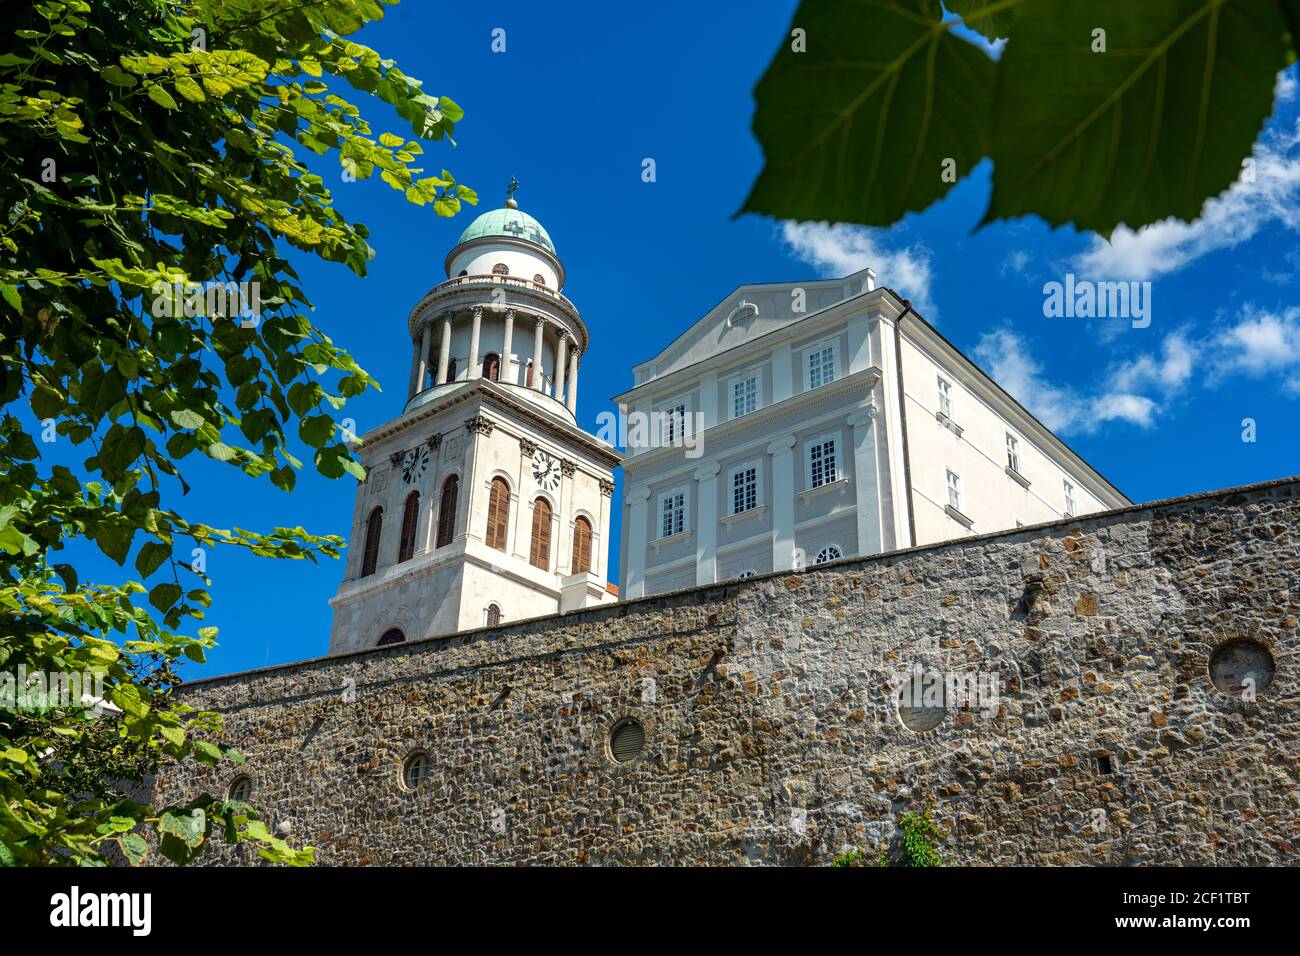 Pannonhalma arch abbey detail with trees around it Stock Photo